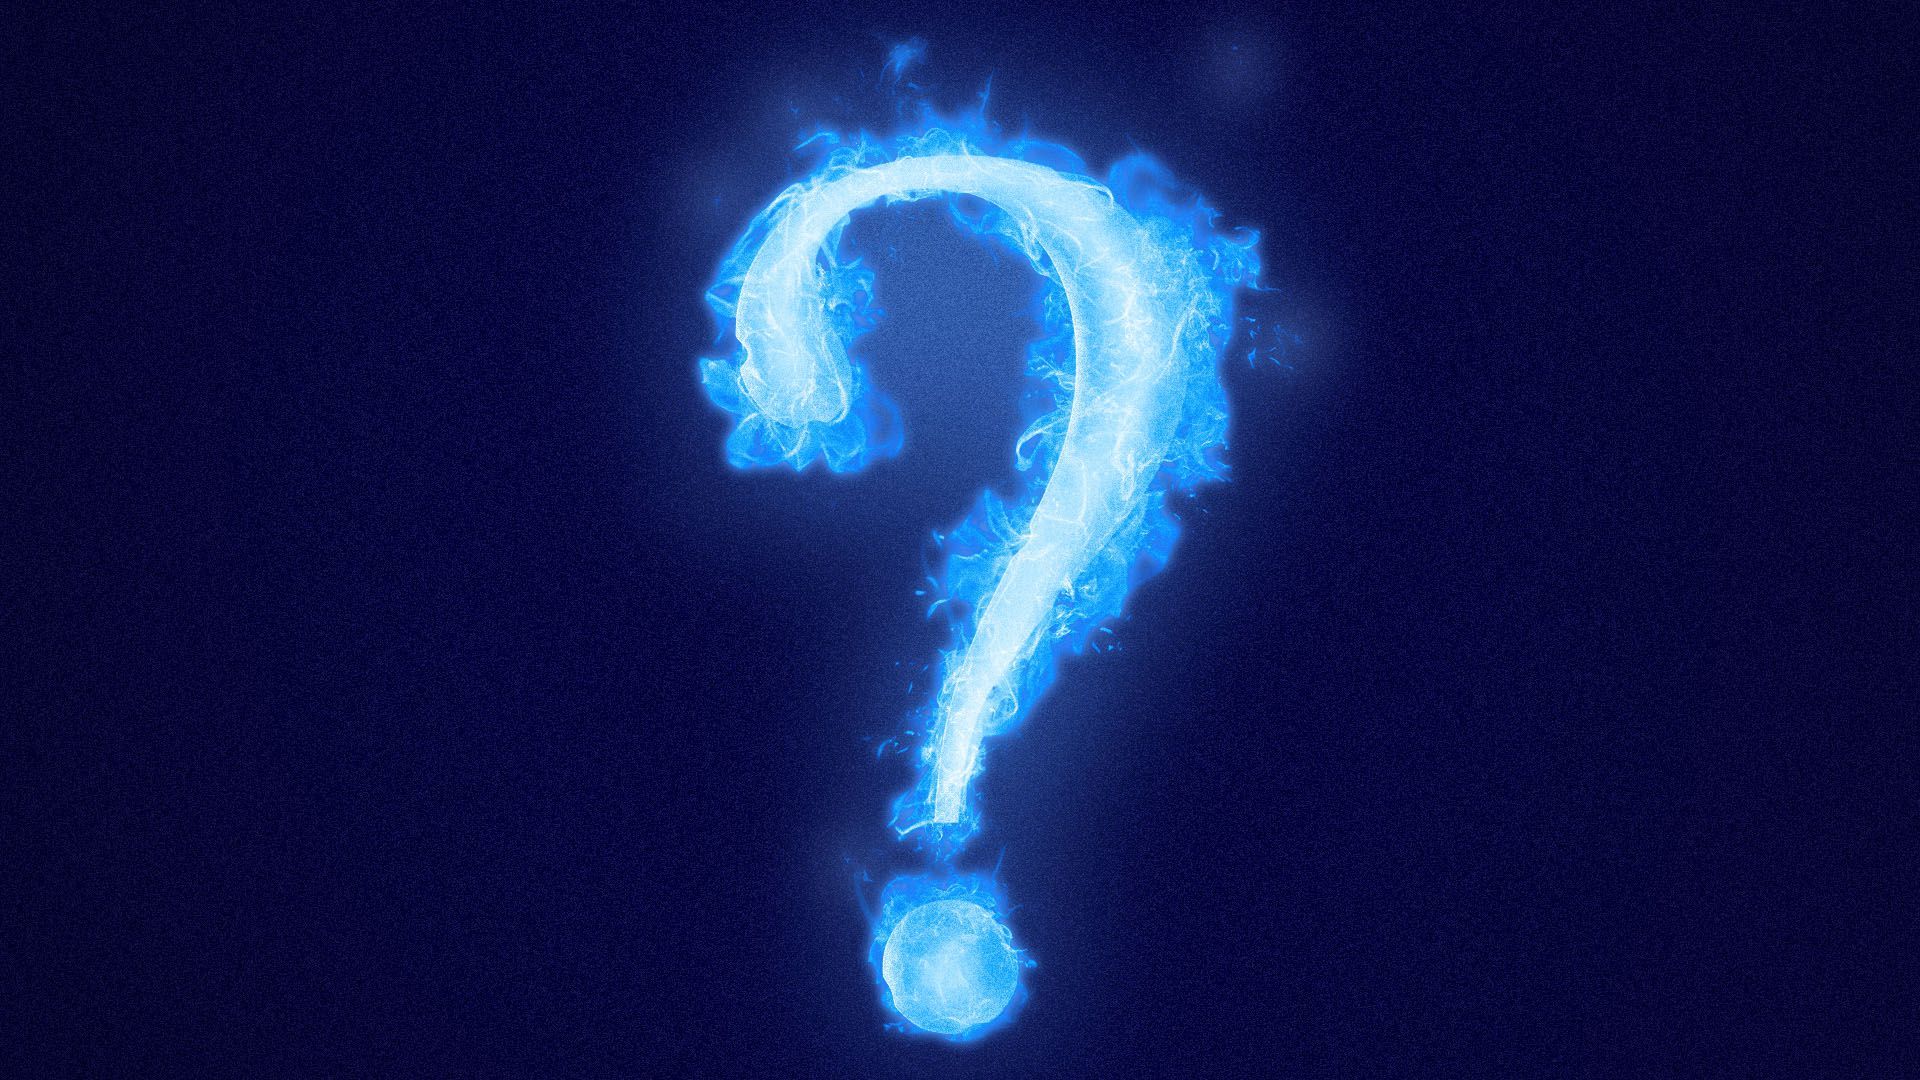 Illustration of a question mark made out of blue fire